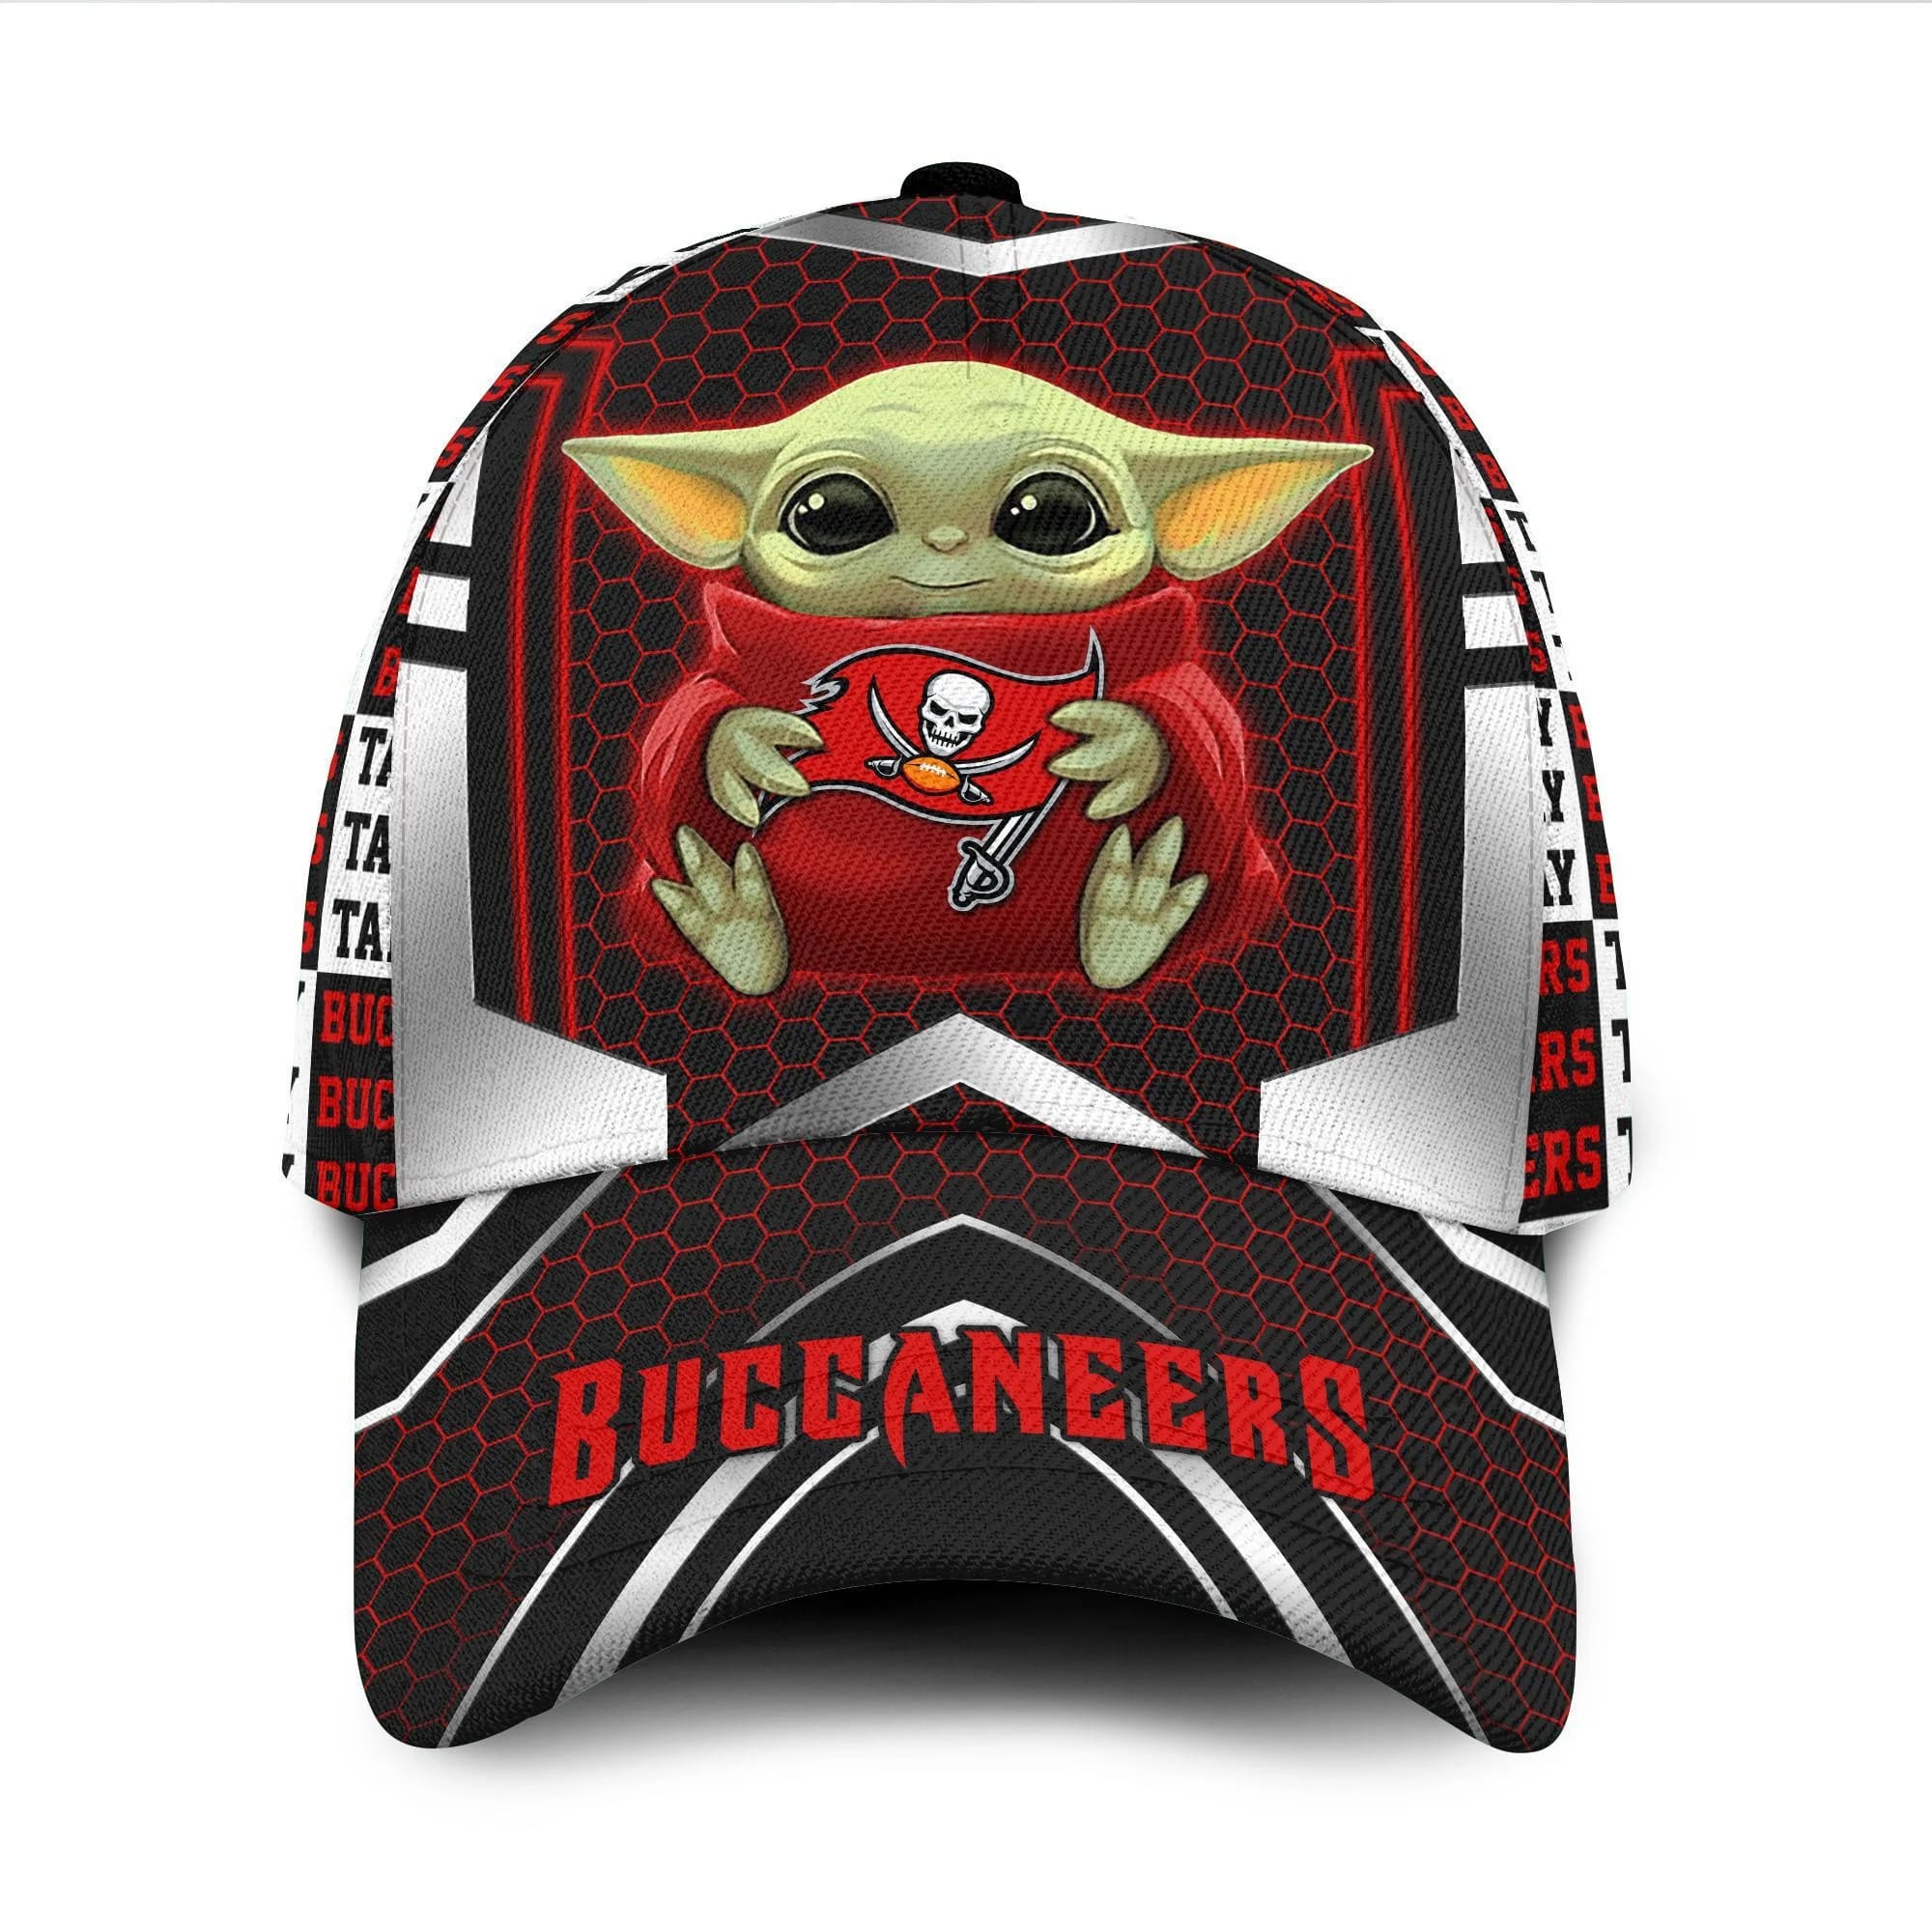 Tampa Bay Buccaneers Baby Yoda All Over Print 3D Baseball Cap H1481t